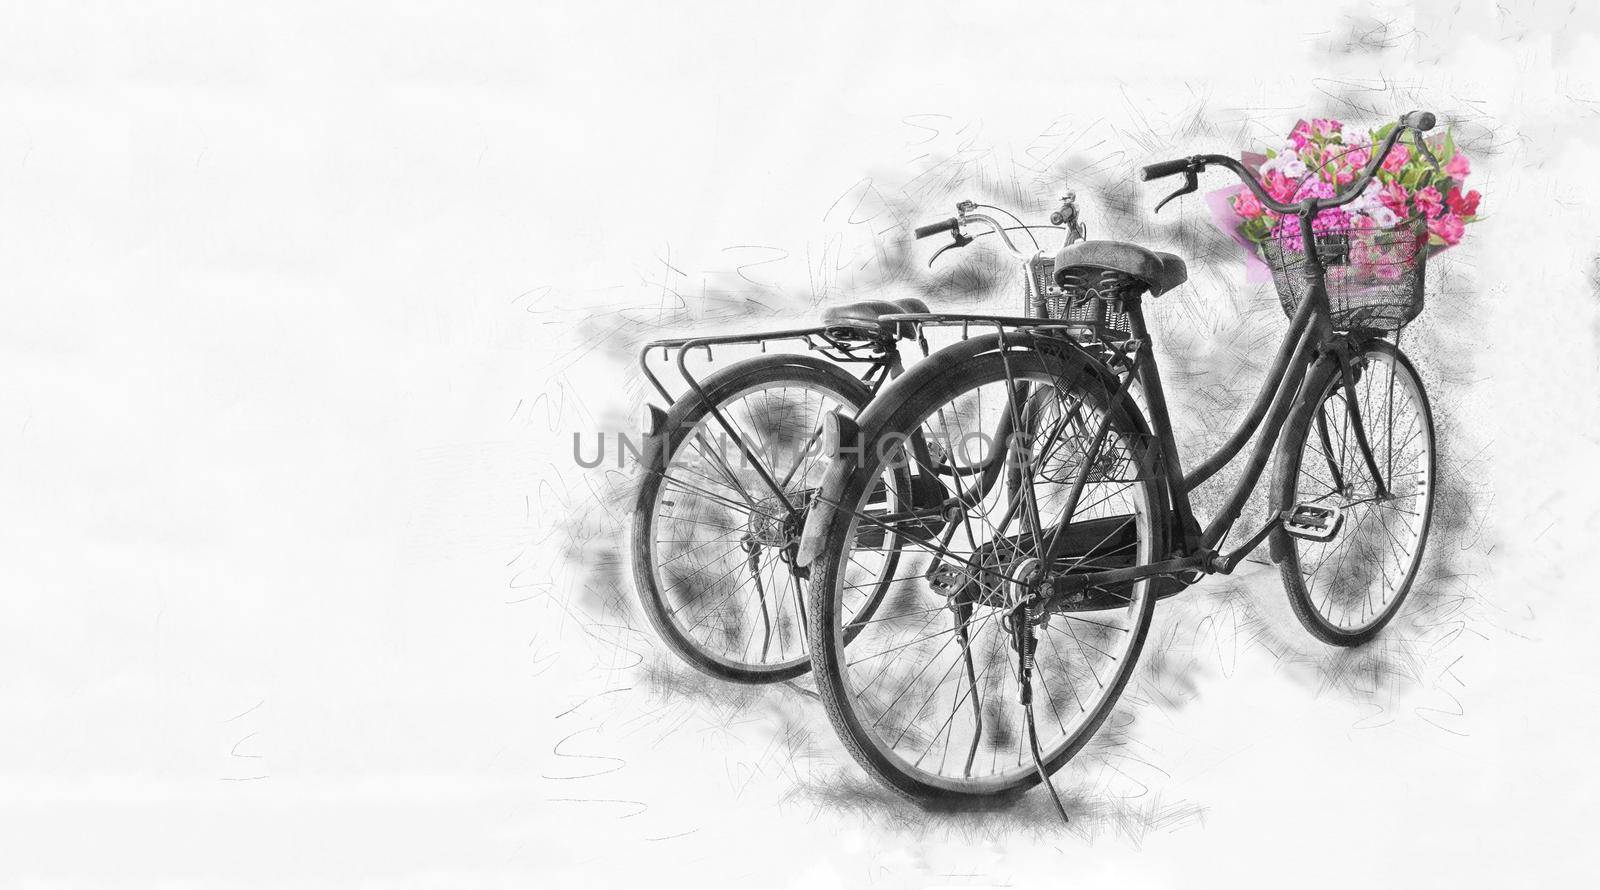  bicycle by suththisumdeang